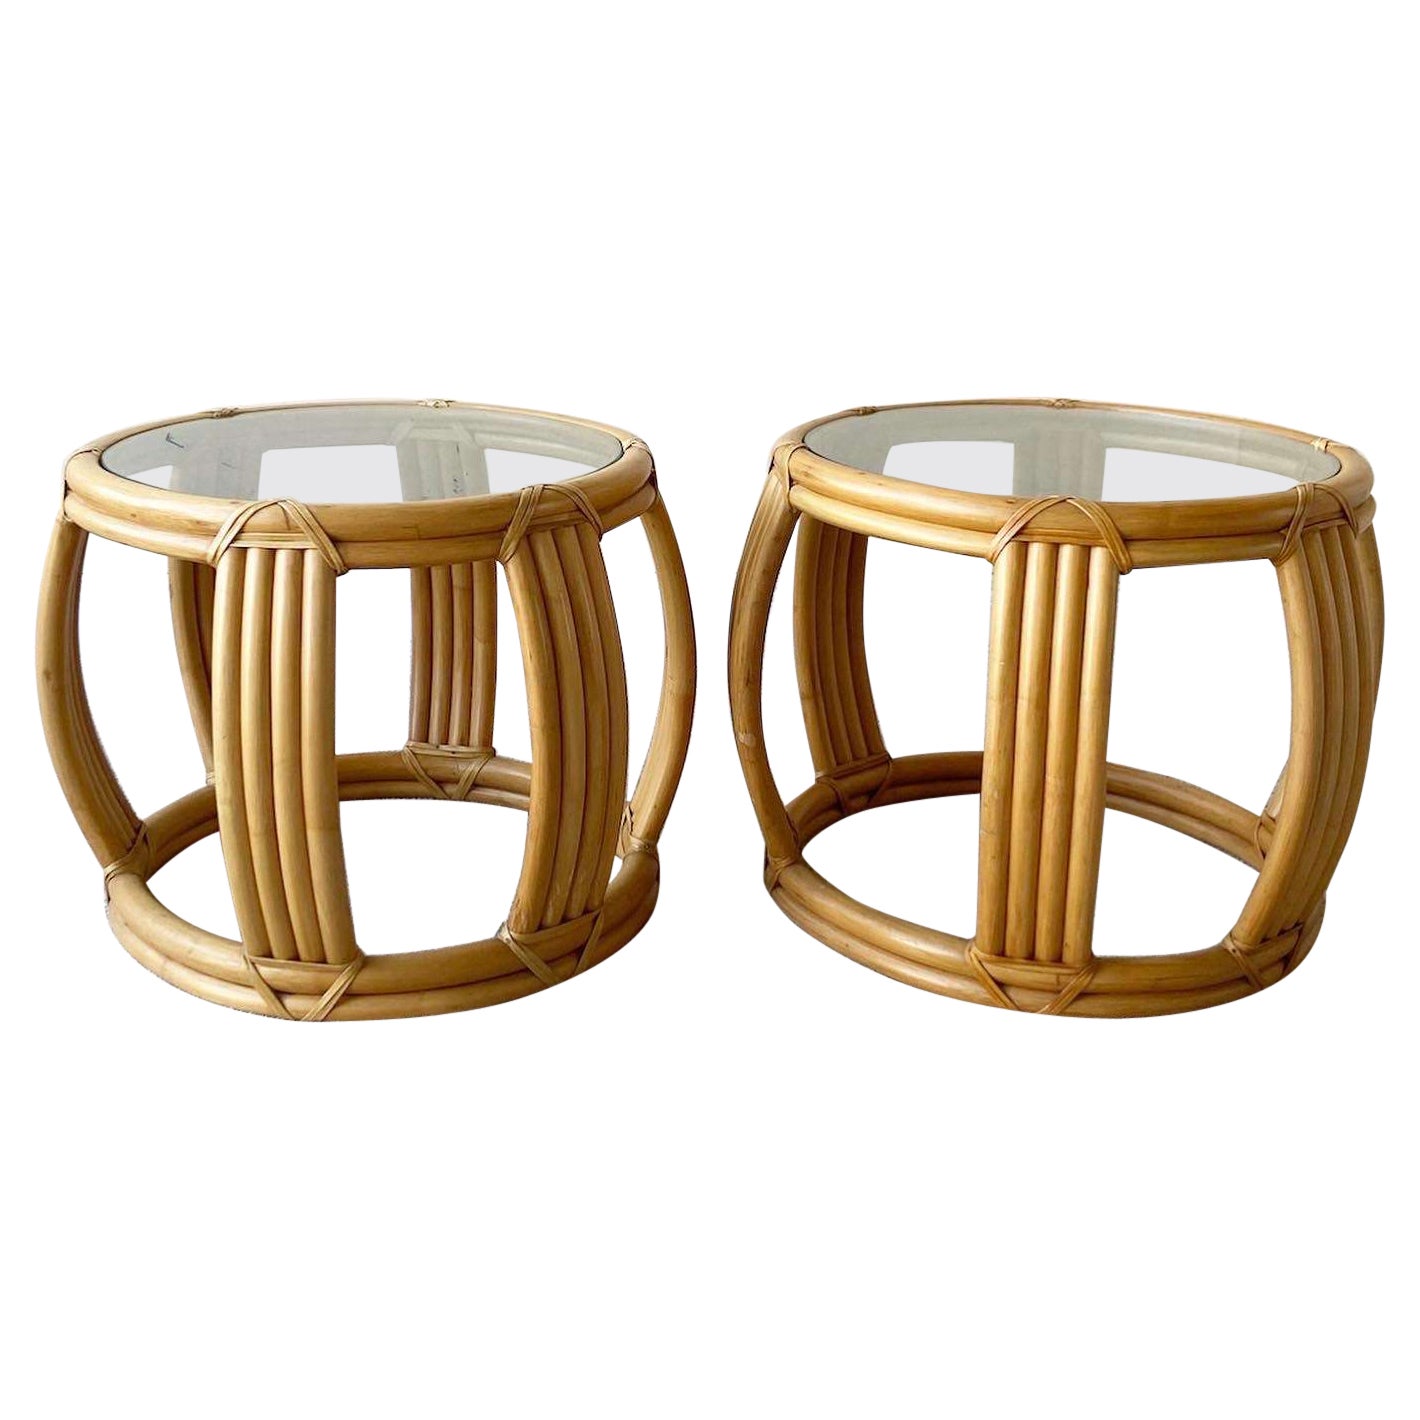 Vintage Boho Chic Bamboo Rattan Oval Side Tables For Sale